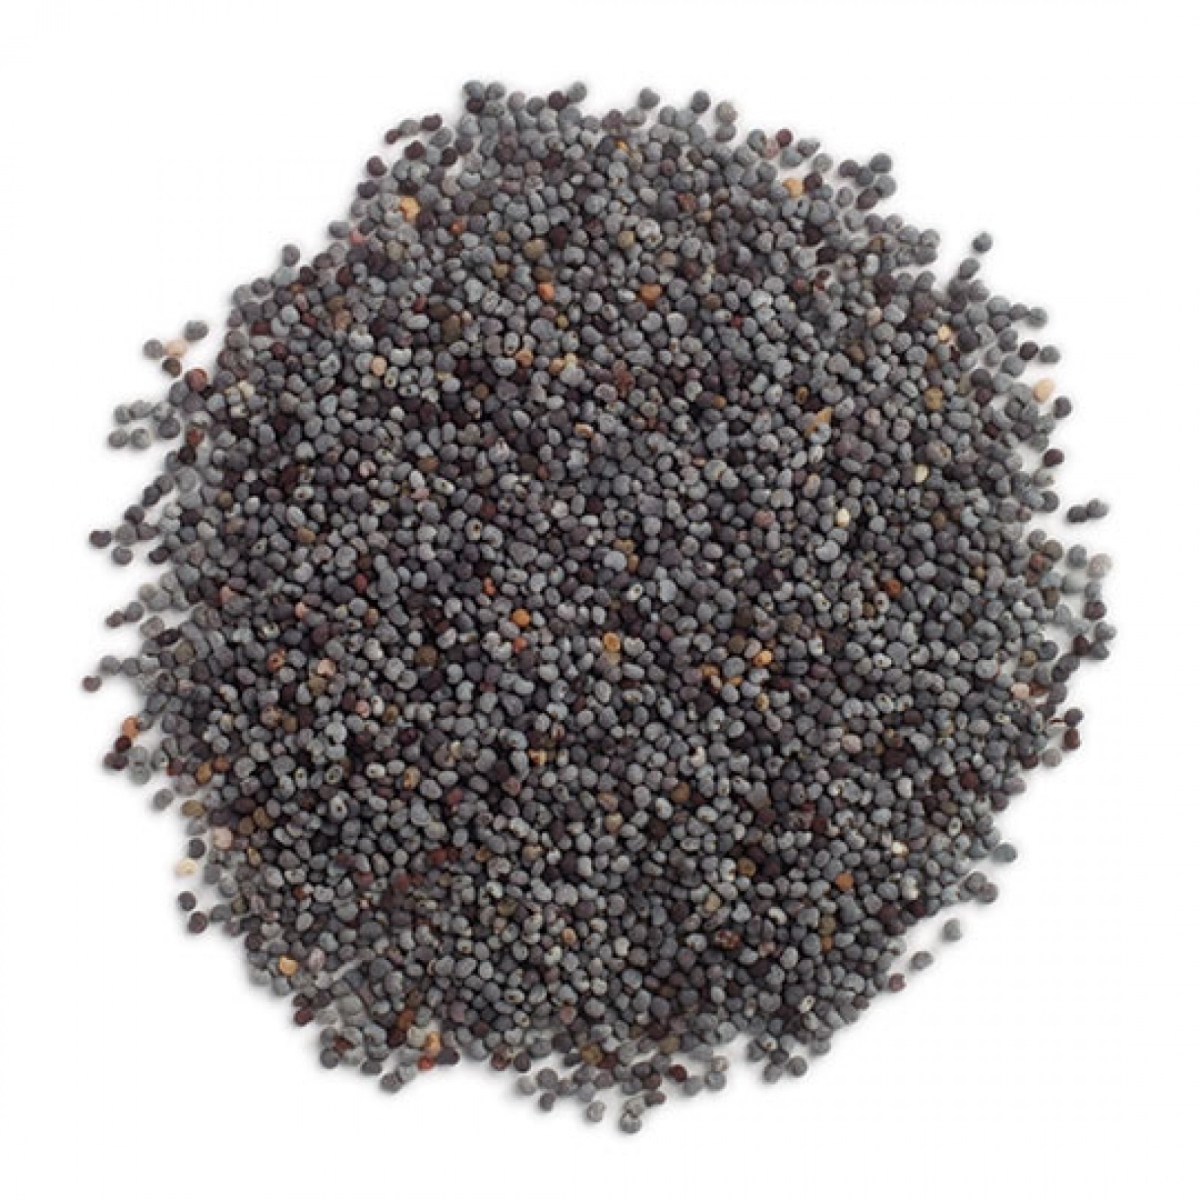 Picture of Frontier 31089 Poppy Seed Whole, 8 oz